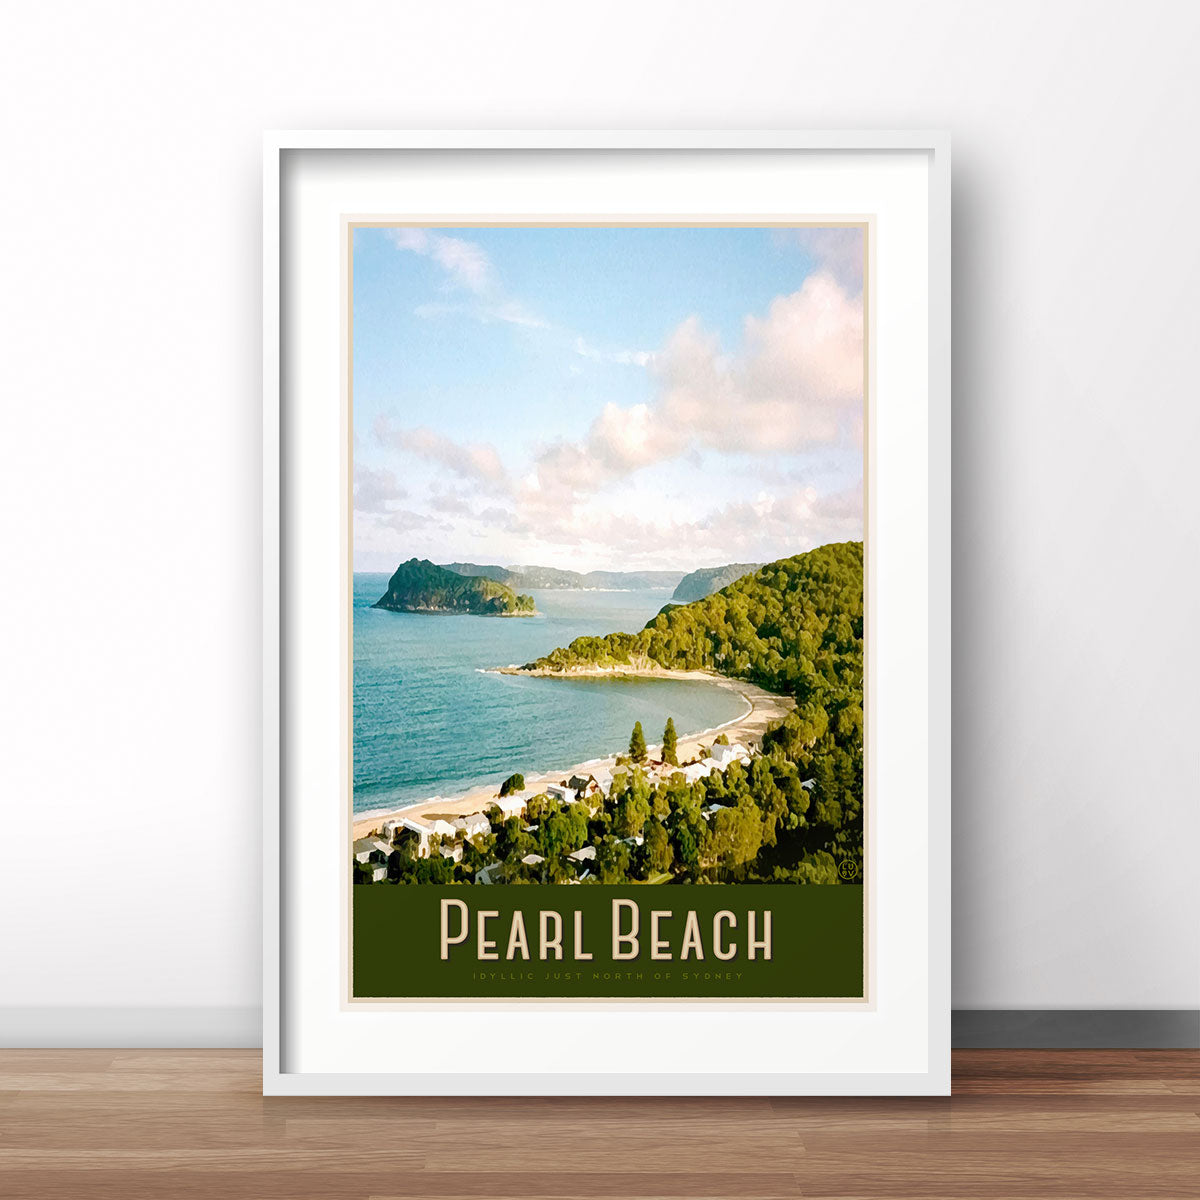 Pearl beach vintage travel poster central coast by places we luv